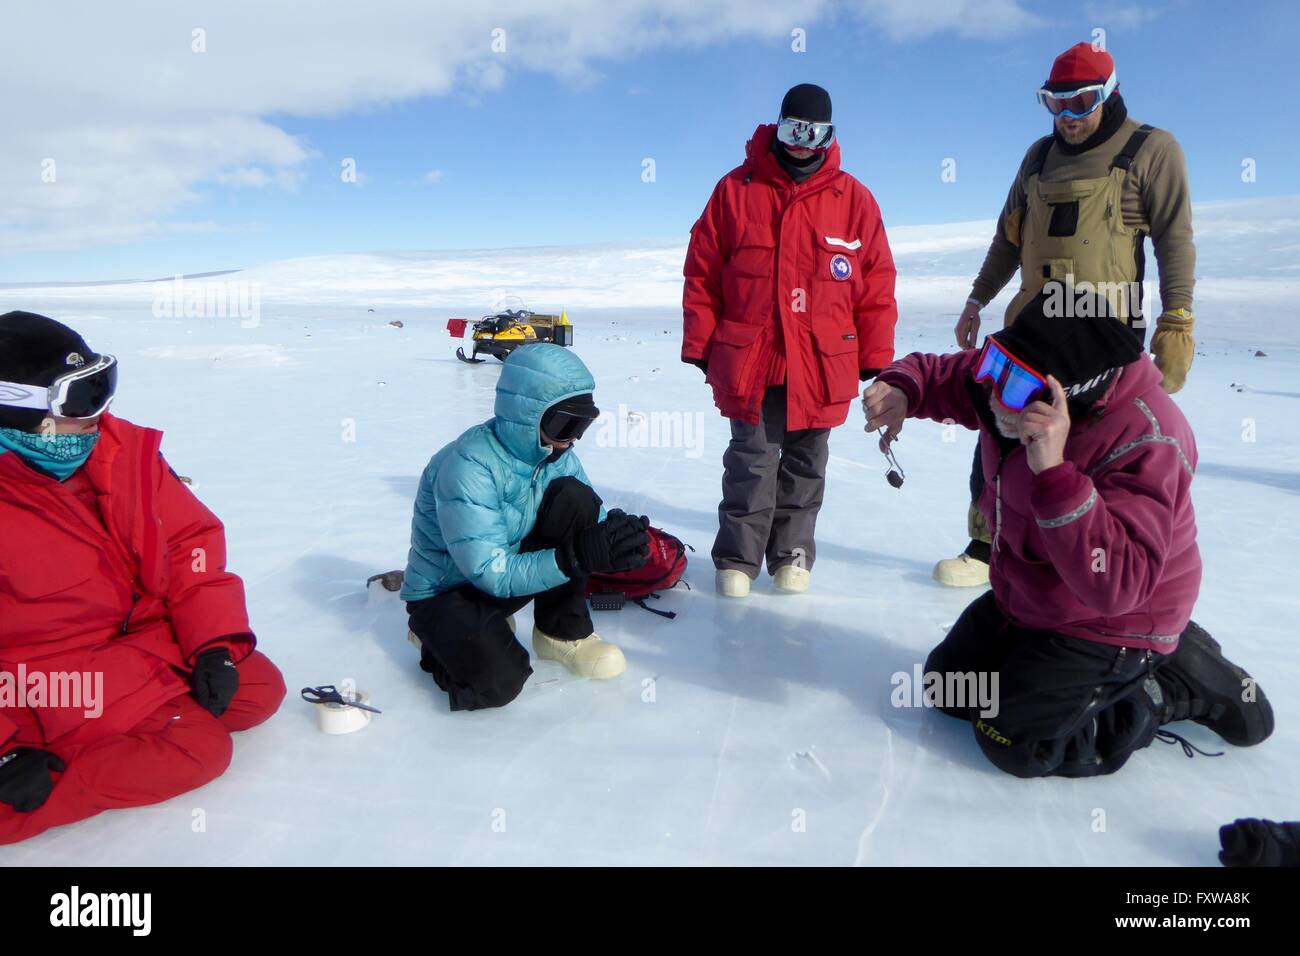 Researchers examine a meteorite found on the blue ice field in the Miller Range December 18, 2015 in Antarctica. Scientists collected 570 meteorite samples during a two-month expedition as part of the Antarctic Search for Meteorites program. Stock Photo